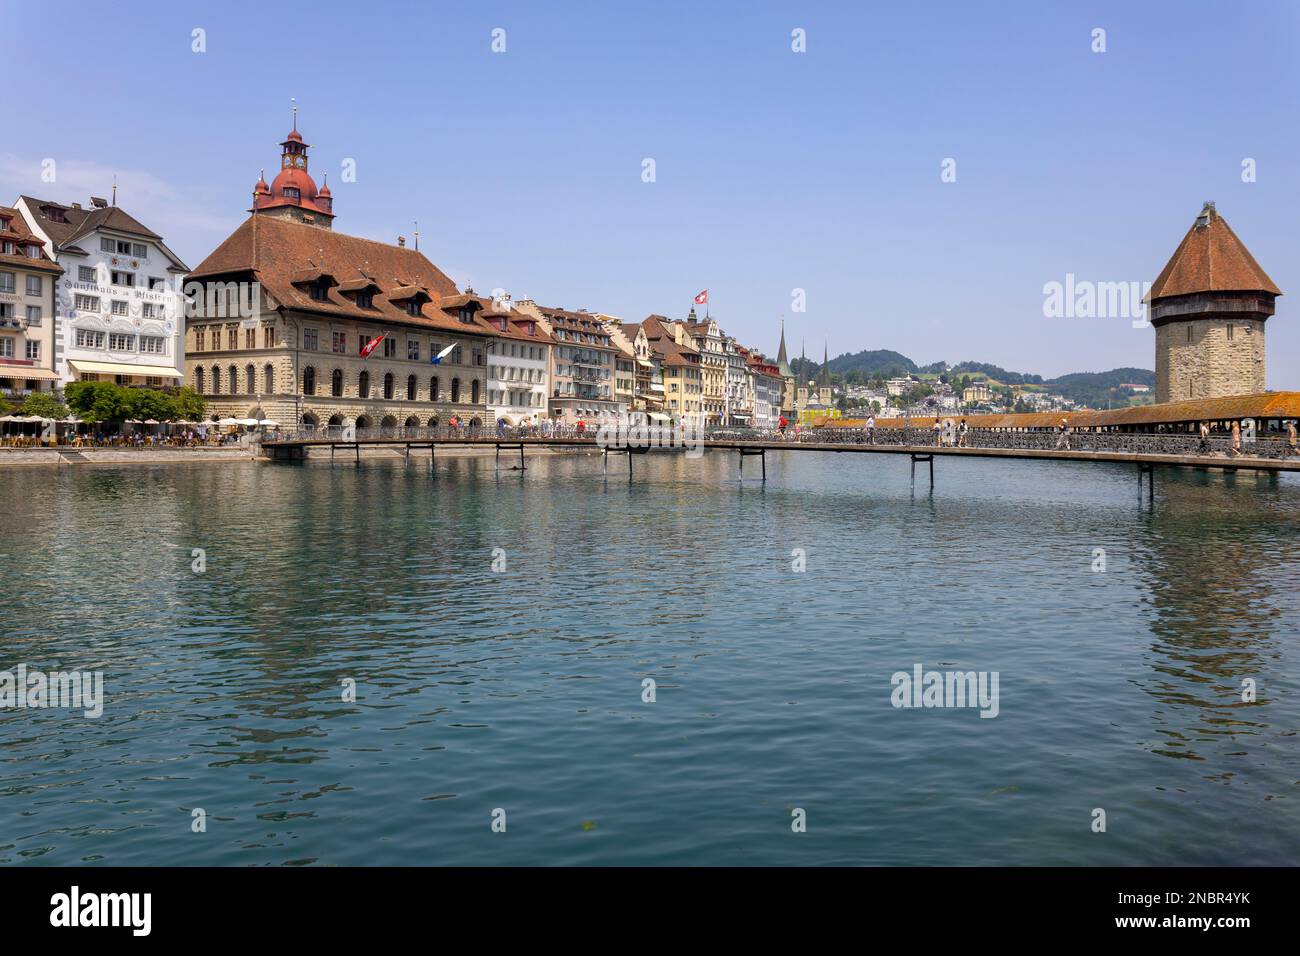 LUCERNE, SWITZERLAND, JUNE 21, 2022 - View of Rathaussteg bridge and the City Hall (Rathaus) in the center city of Lucerne, Switzerland Stock Photo